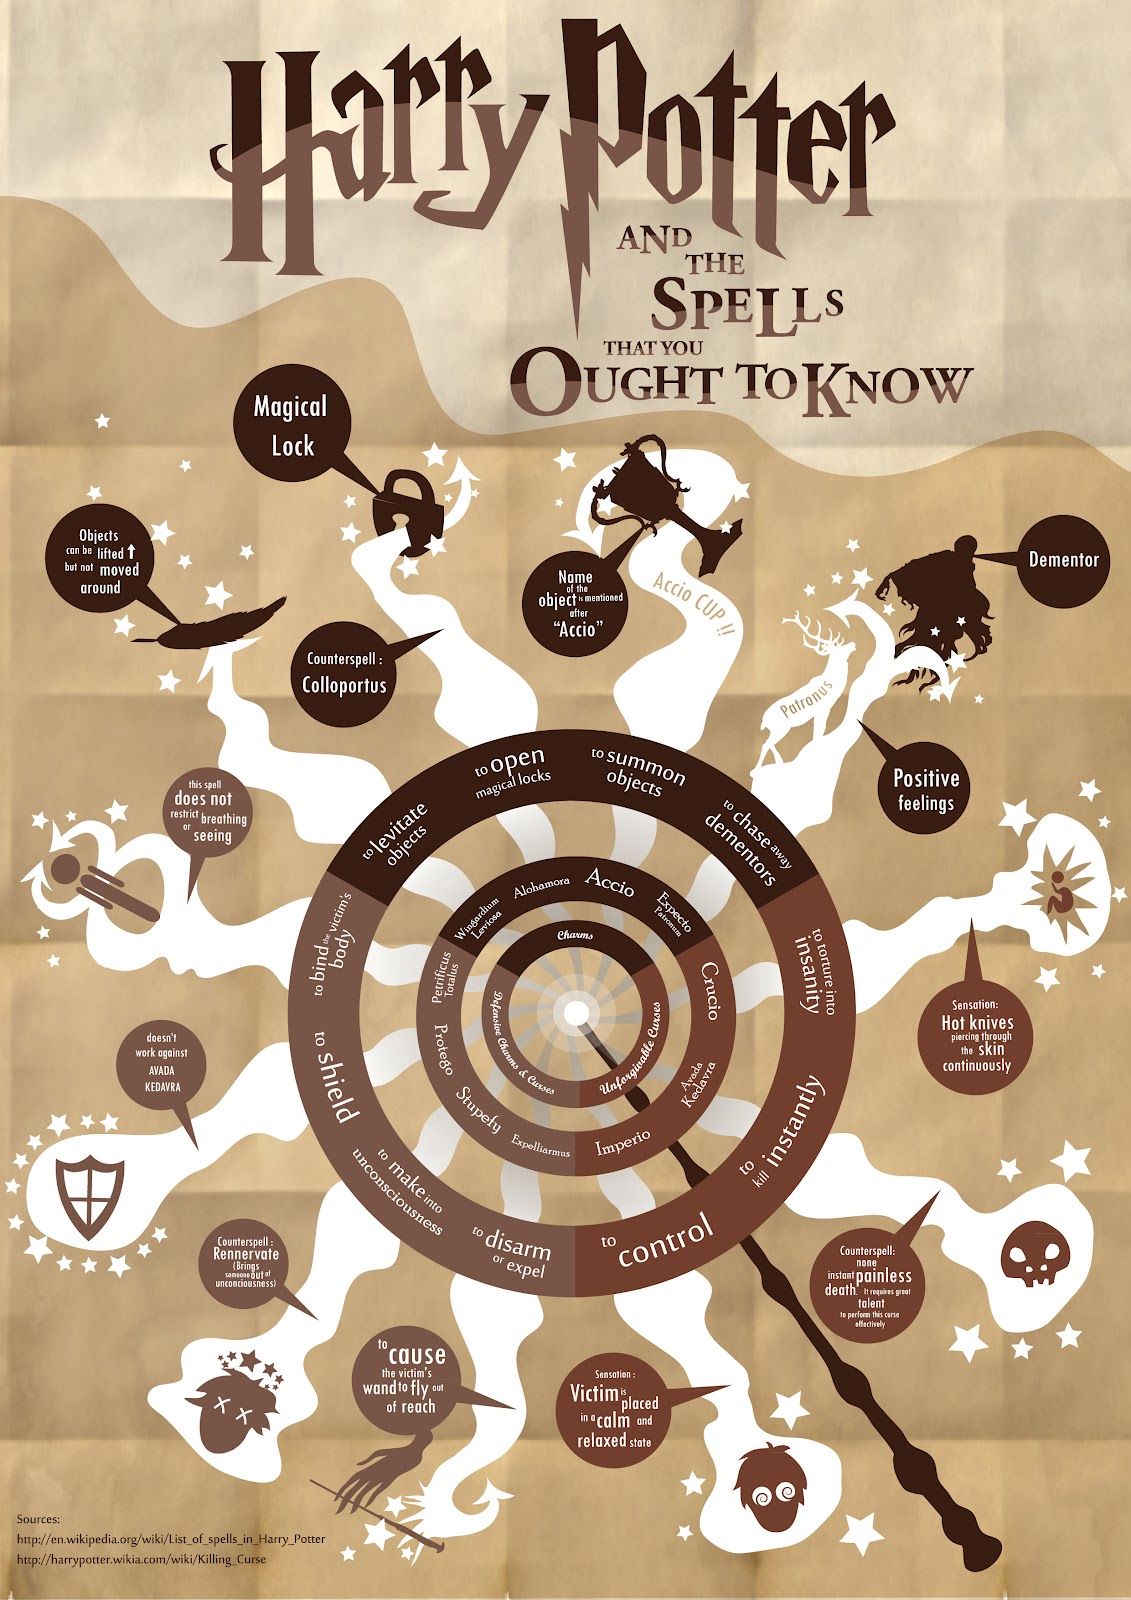 The Spells You Ought to Know.